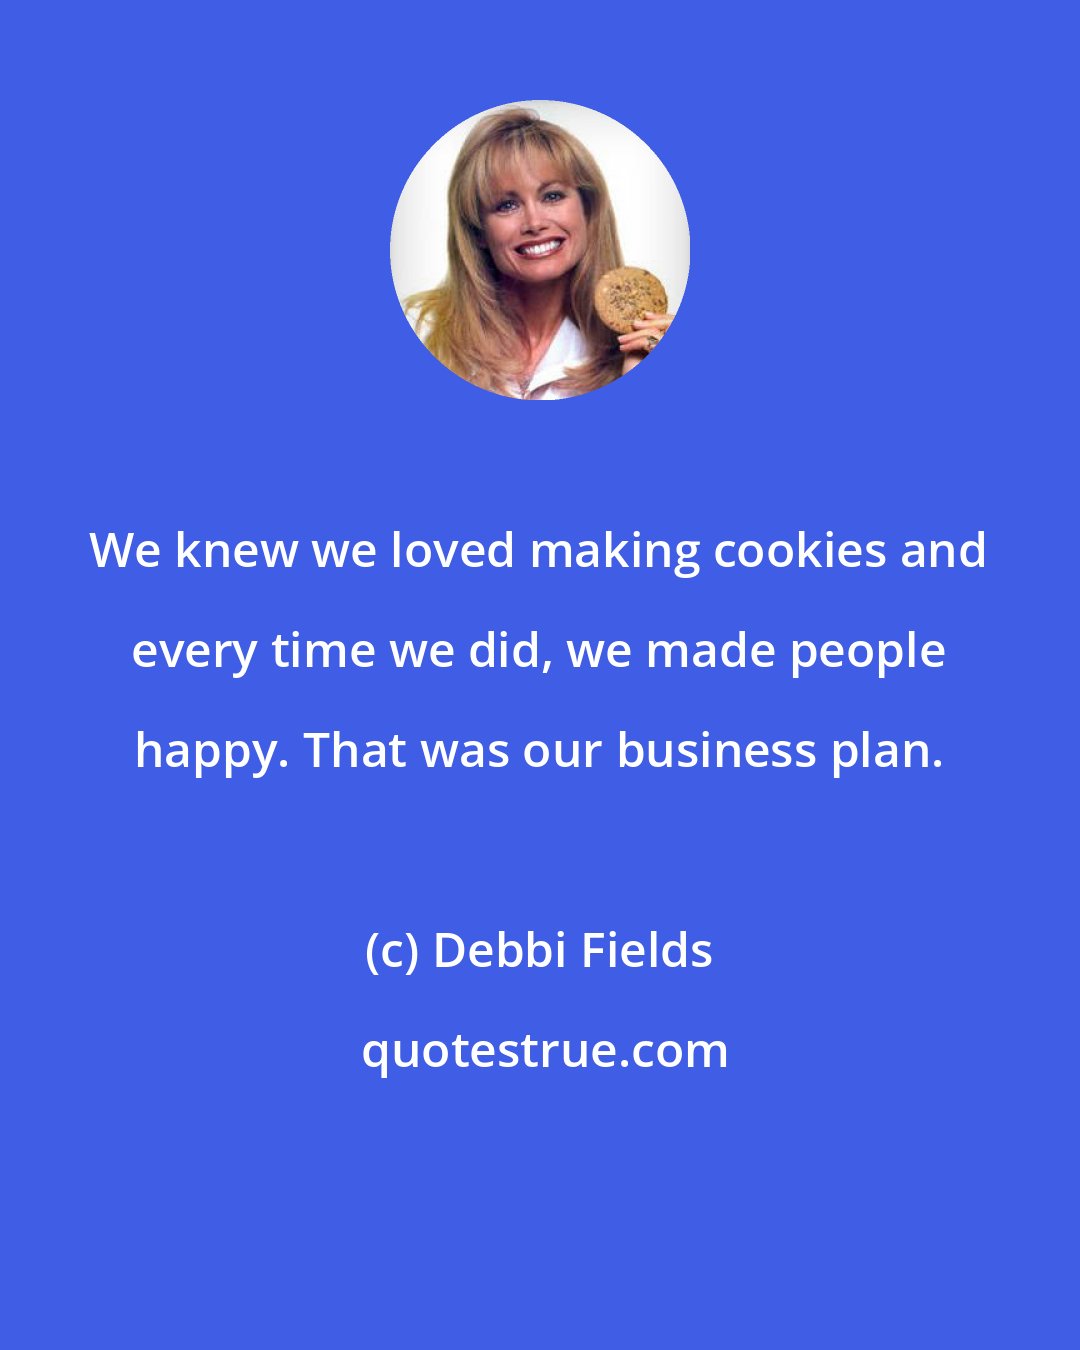 Debbi Fields: We knew we loved making cookies and every time we did, we made people happy. That was our business plan.